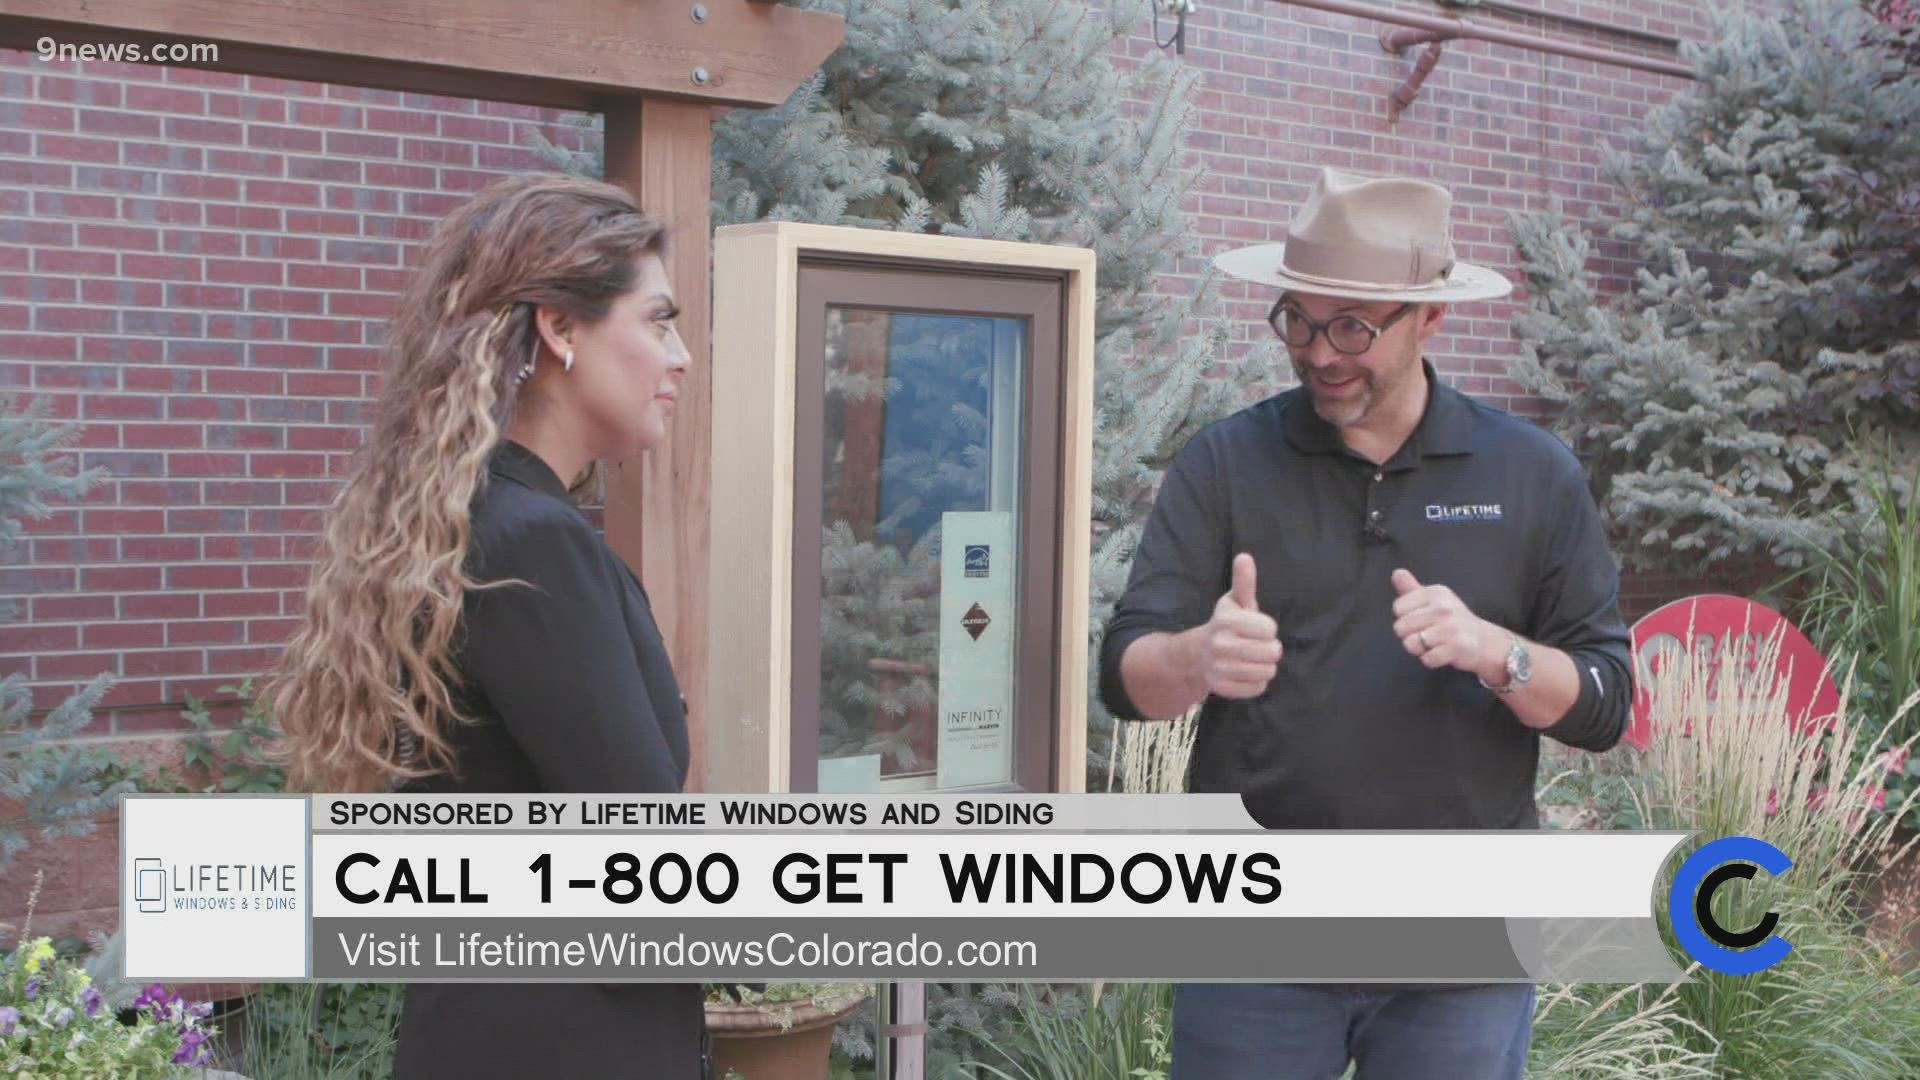 Visit LifetimeWindowsColorado.com to find out all the ways you can save money on windows, doors and siding. **PAID CONTENT**